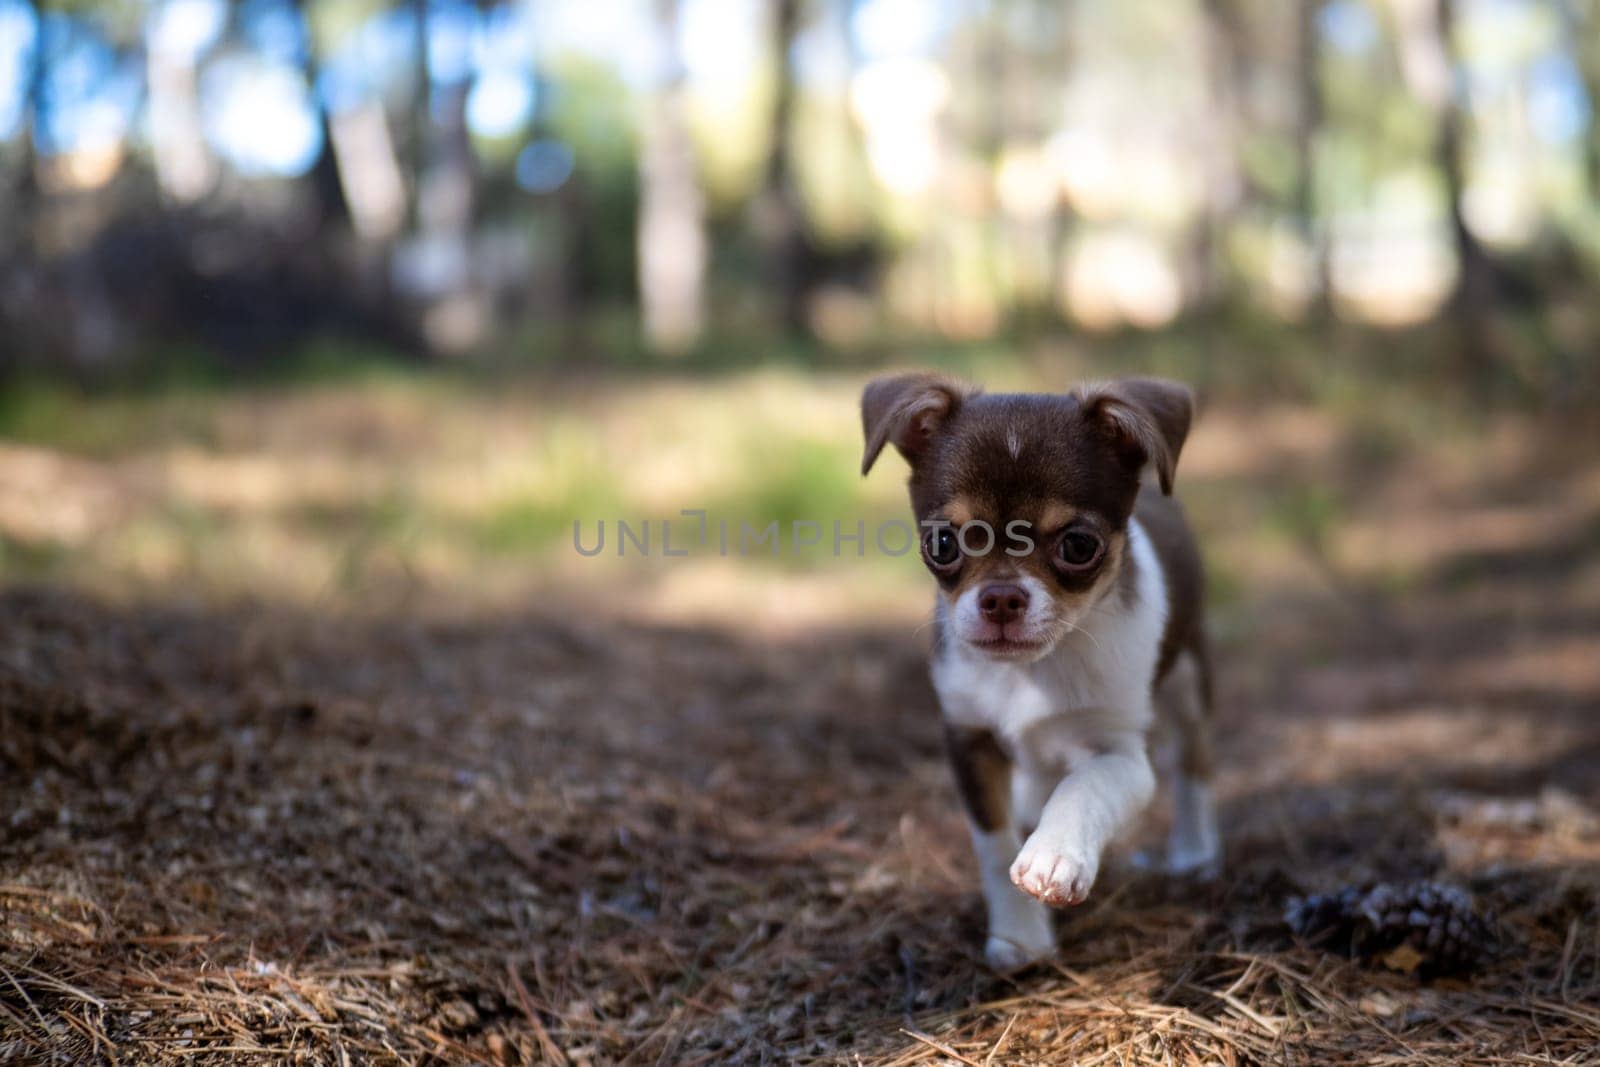 A small Chihuahua puppy captured in a moment of wanderlust, walking through the forest with curiosity and determination.